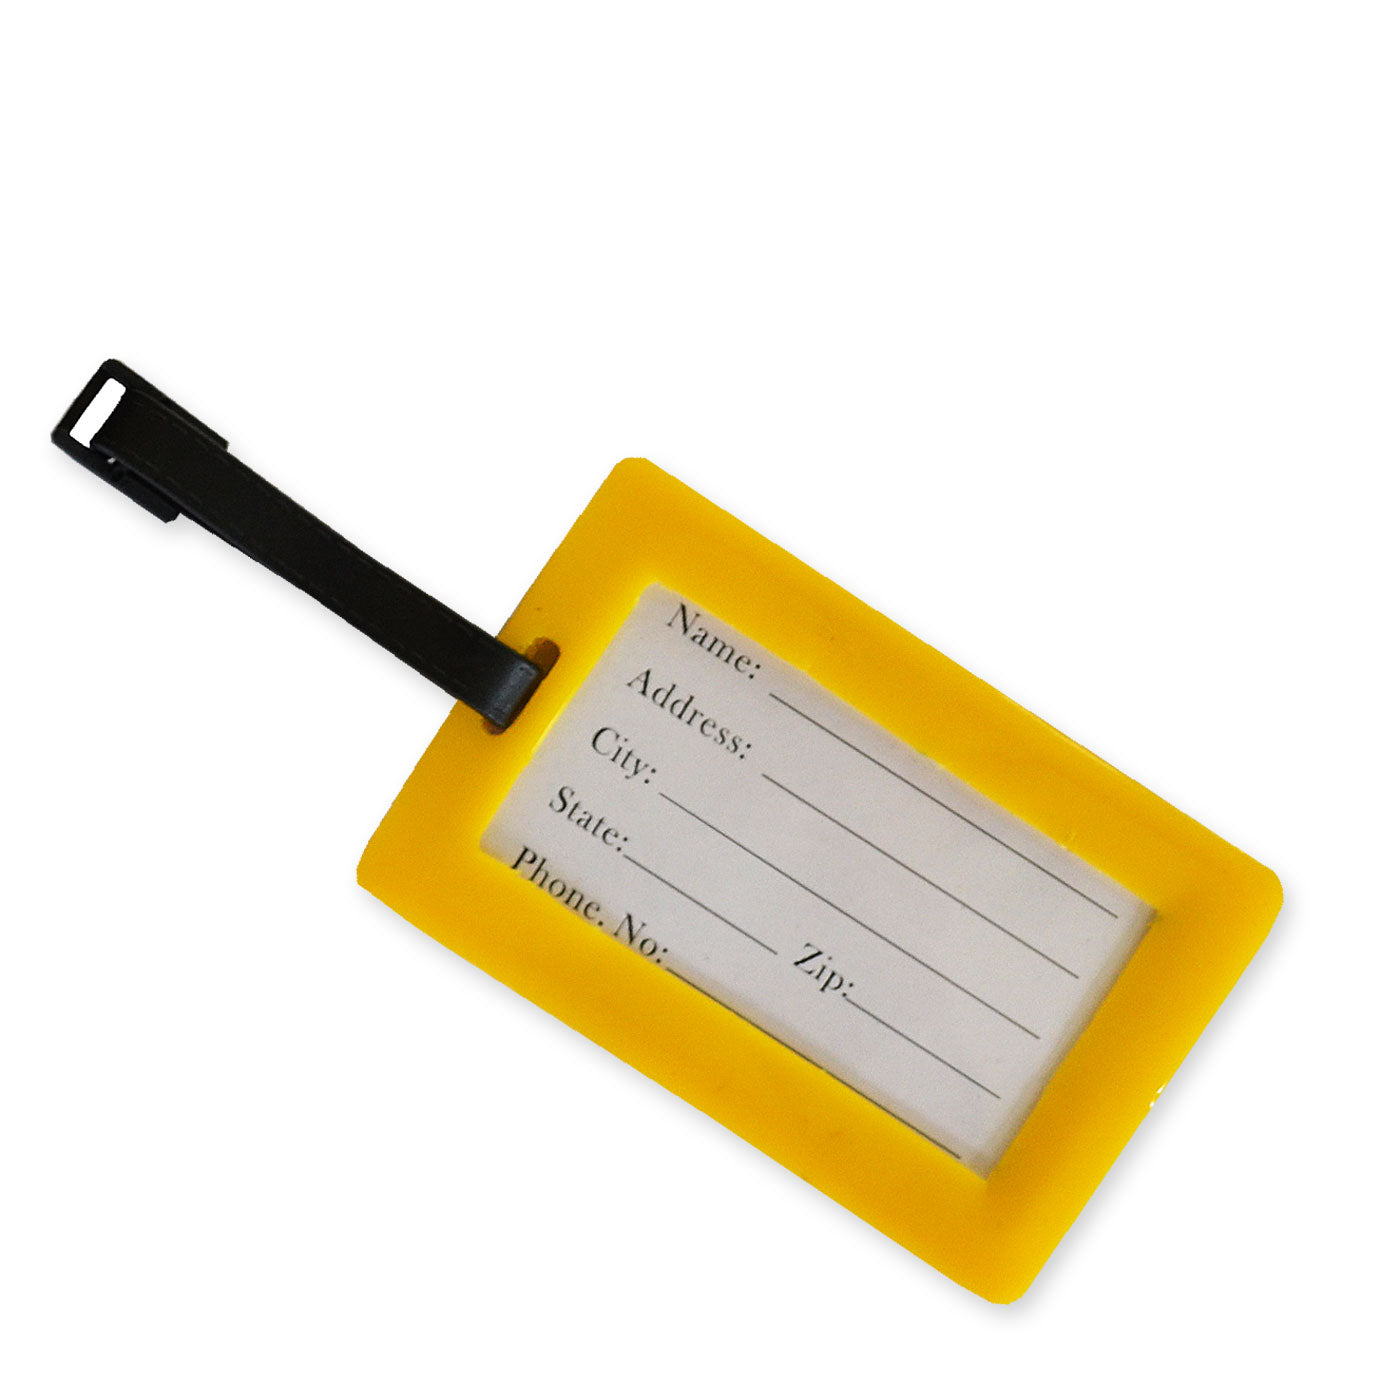 Luggage tag for easy identification